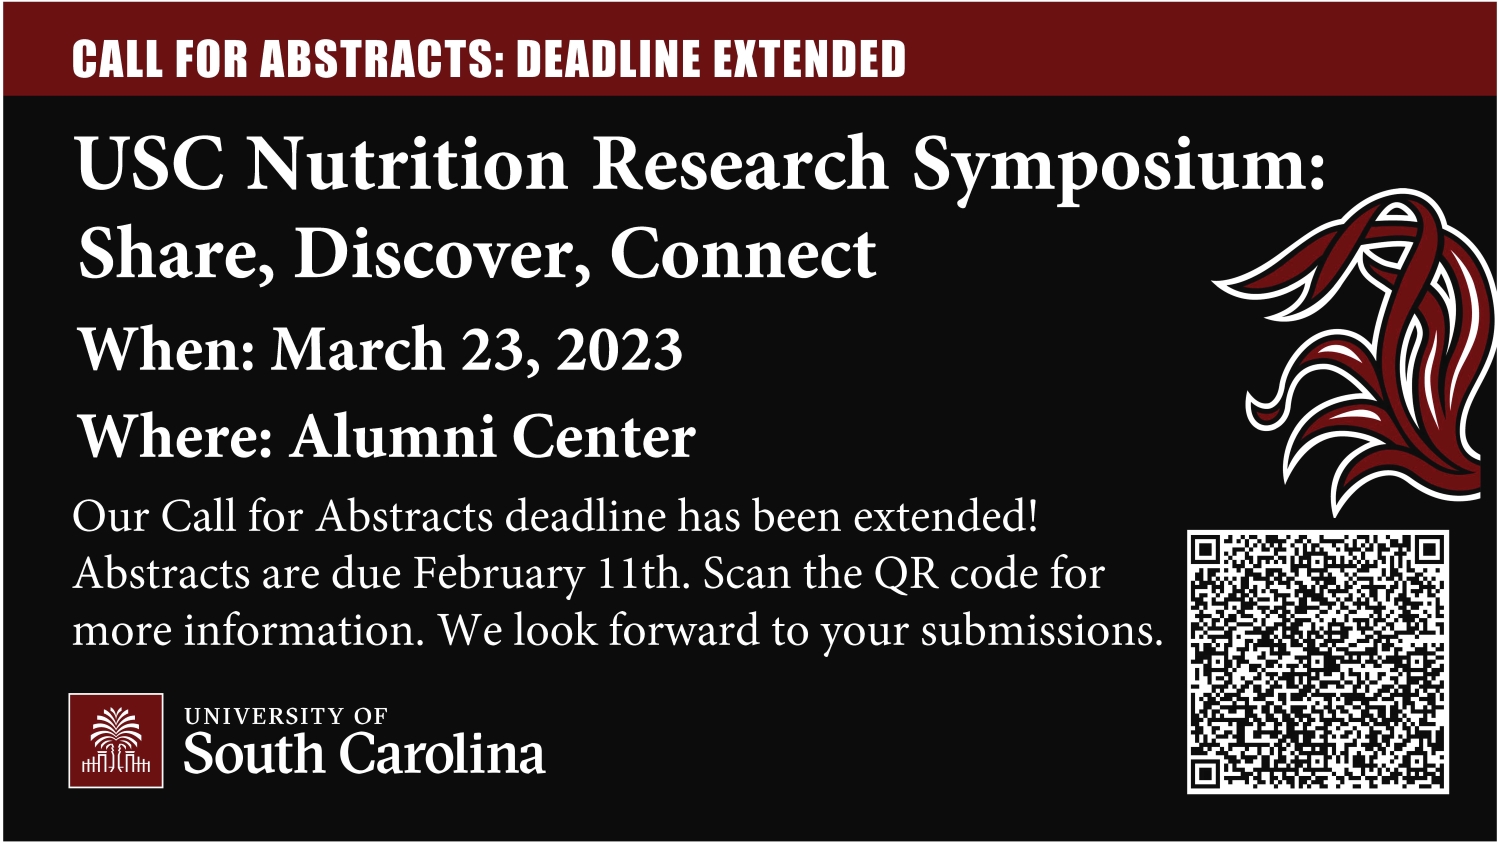 abstract deadline extended